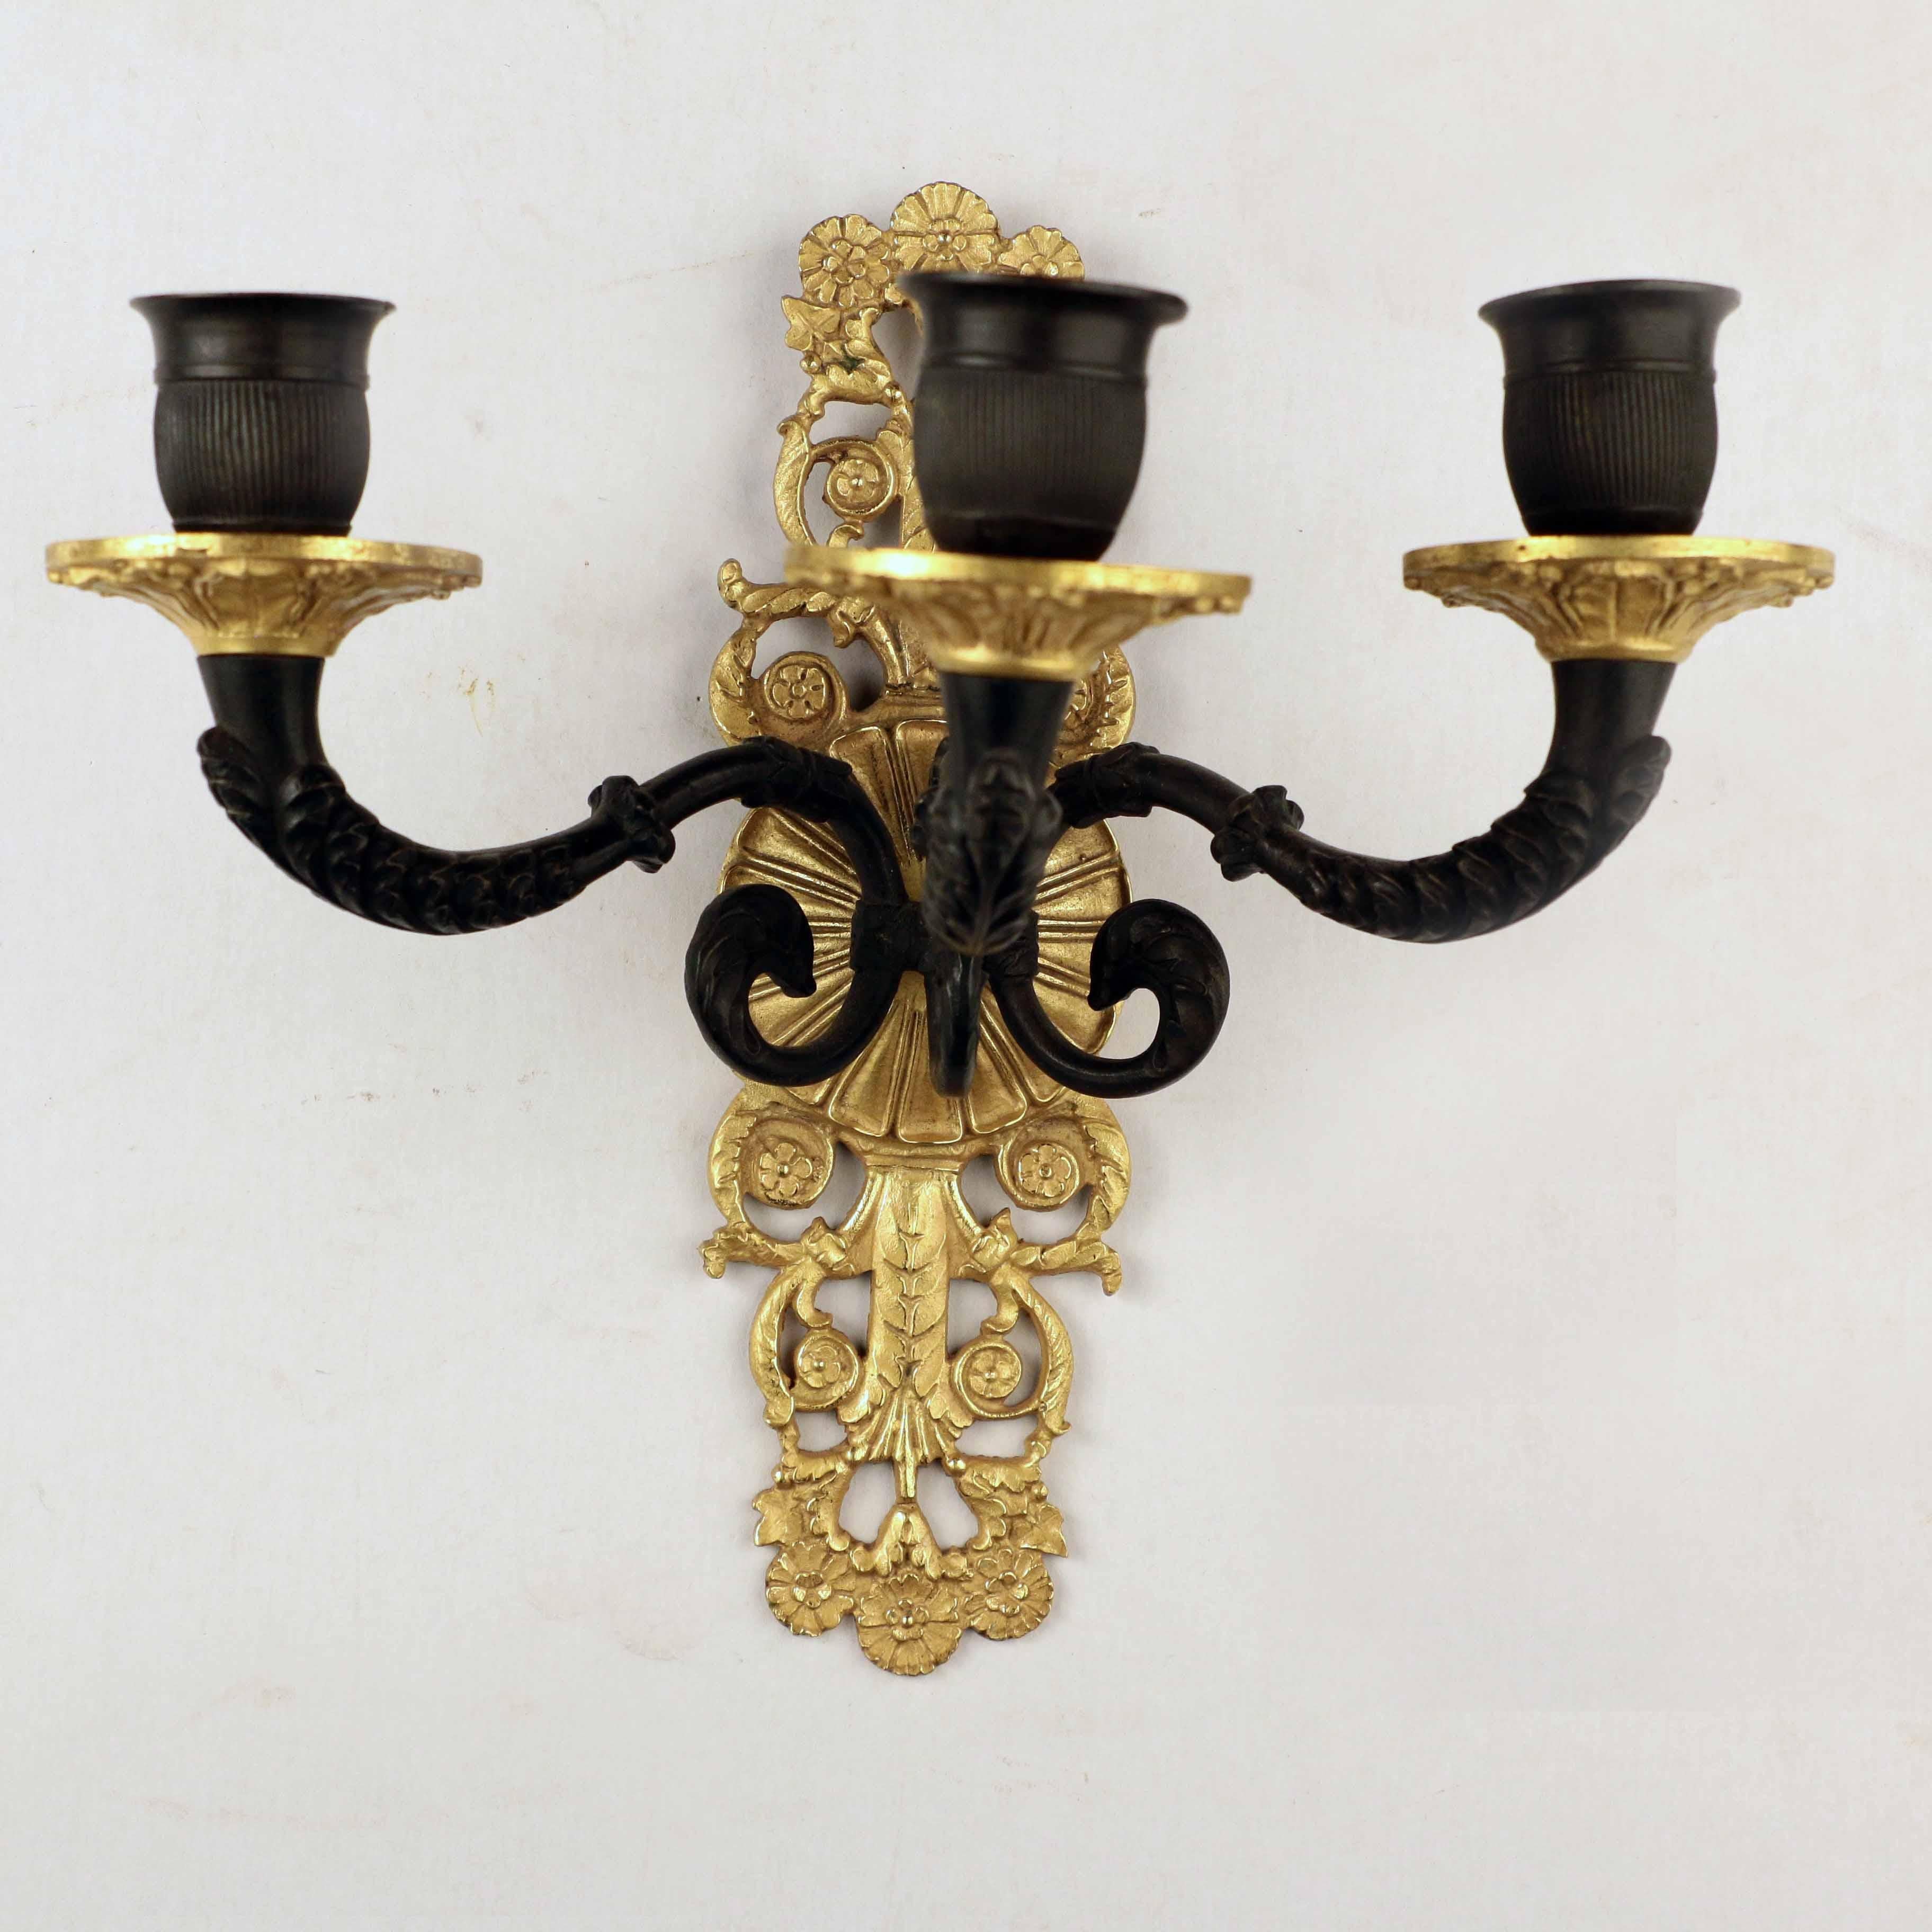 These good quality sconces in mat black and gilt bronze are pierced with scrolls and flower heads and with drip pans and arms cast with stylized acanthus. The two-tone gilding and handmade nut suggest a date no later than the Belle Époque. This